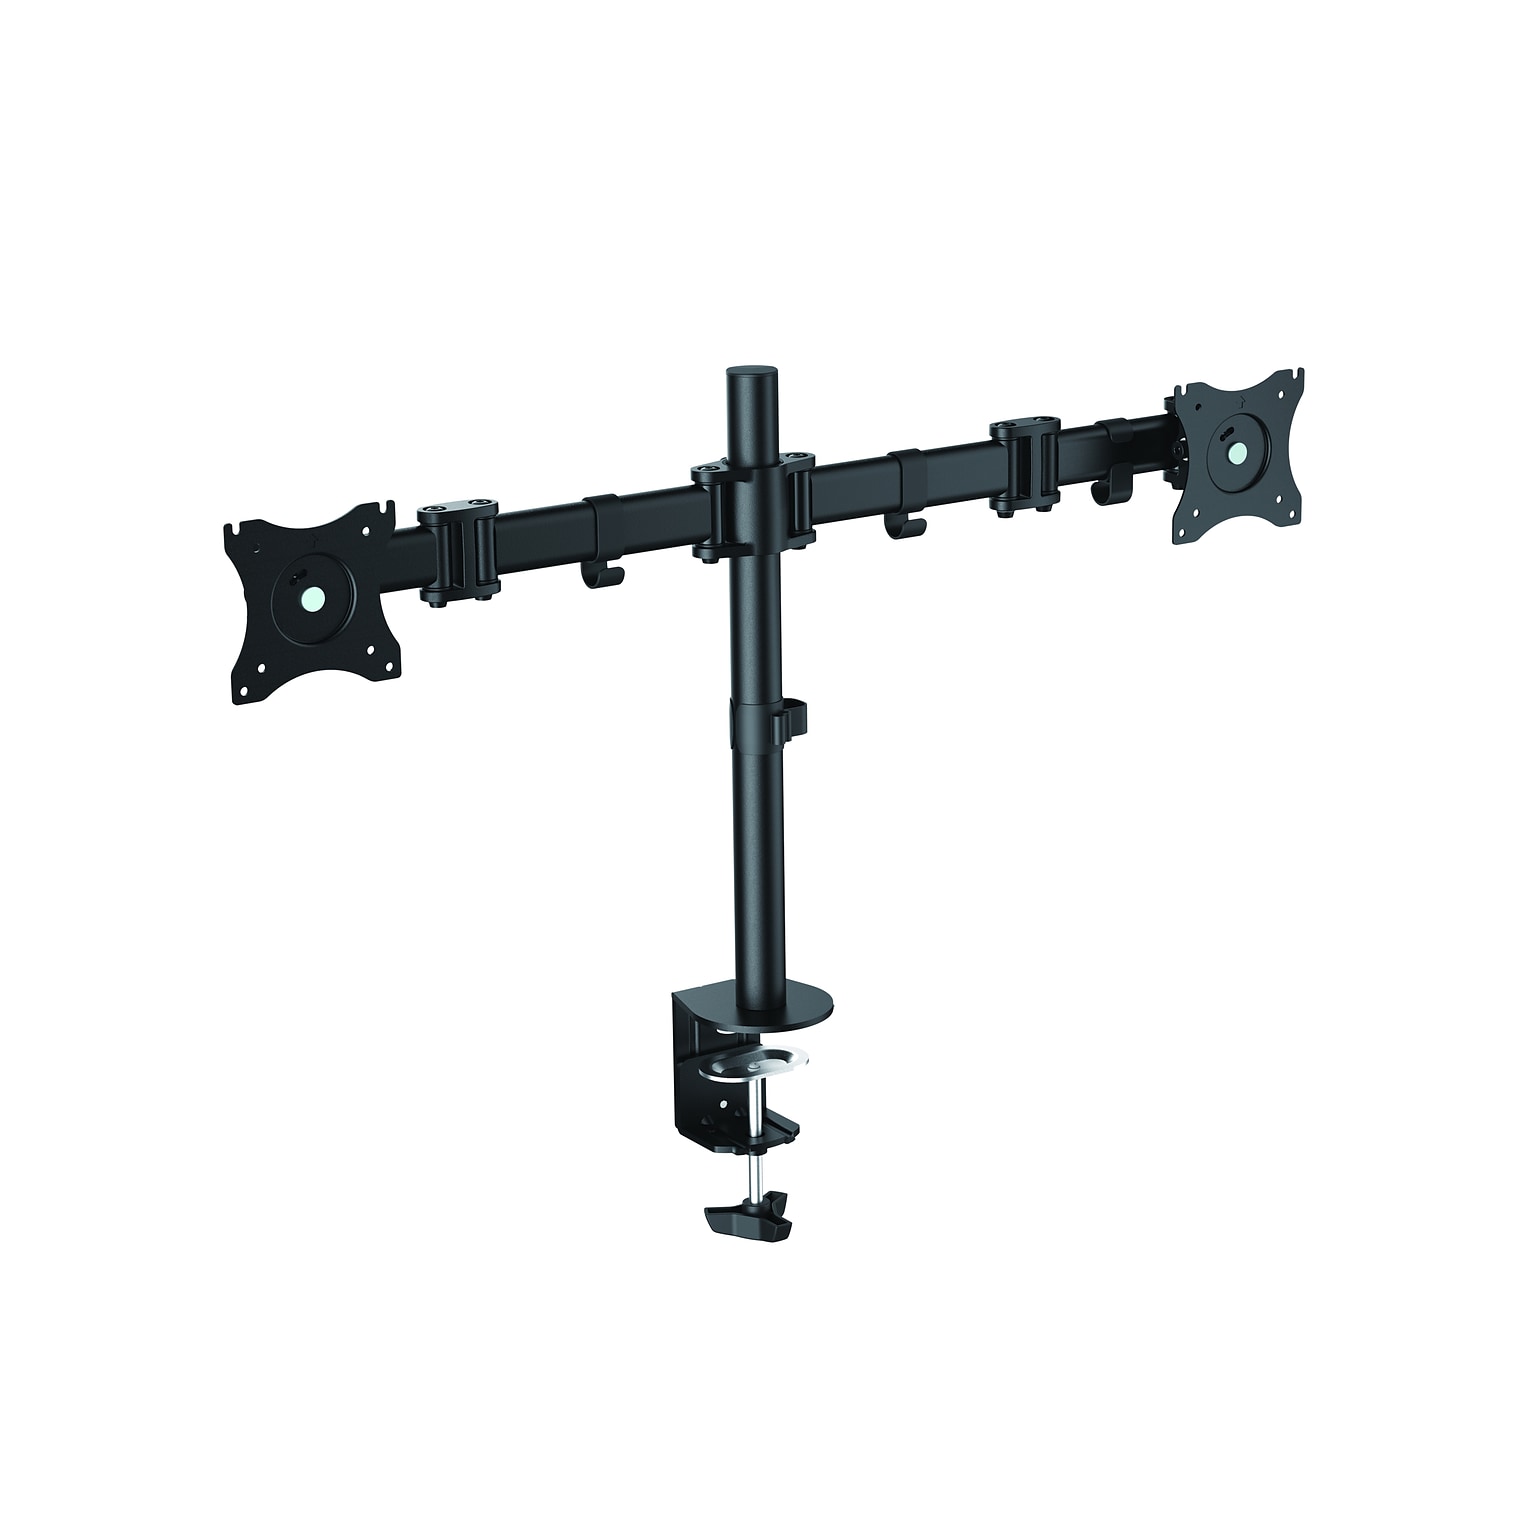 Rocelco Dual Monitor Mount, Articulating Arms for 13-27 LED LCD Screens, Black (R DM2)